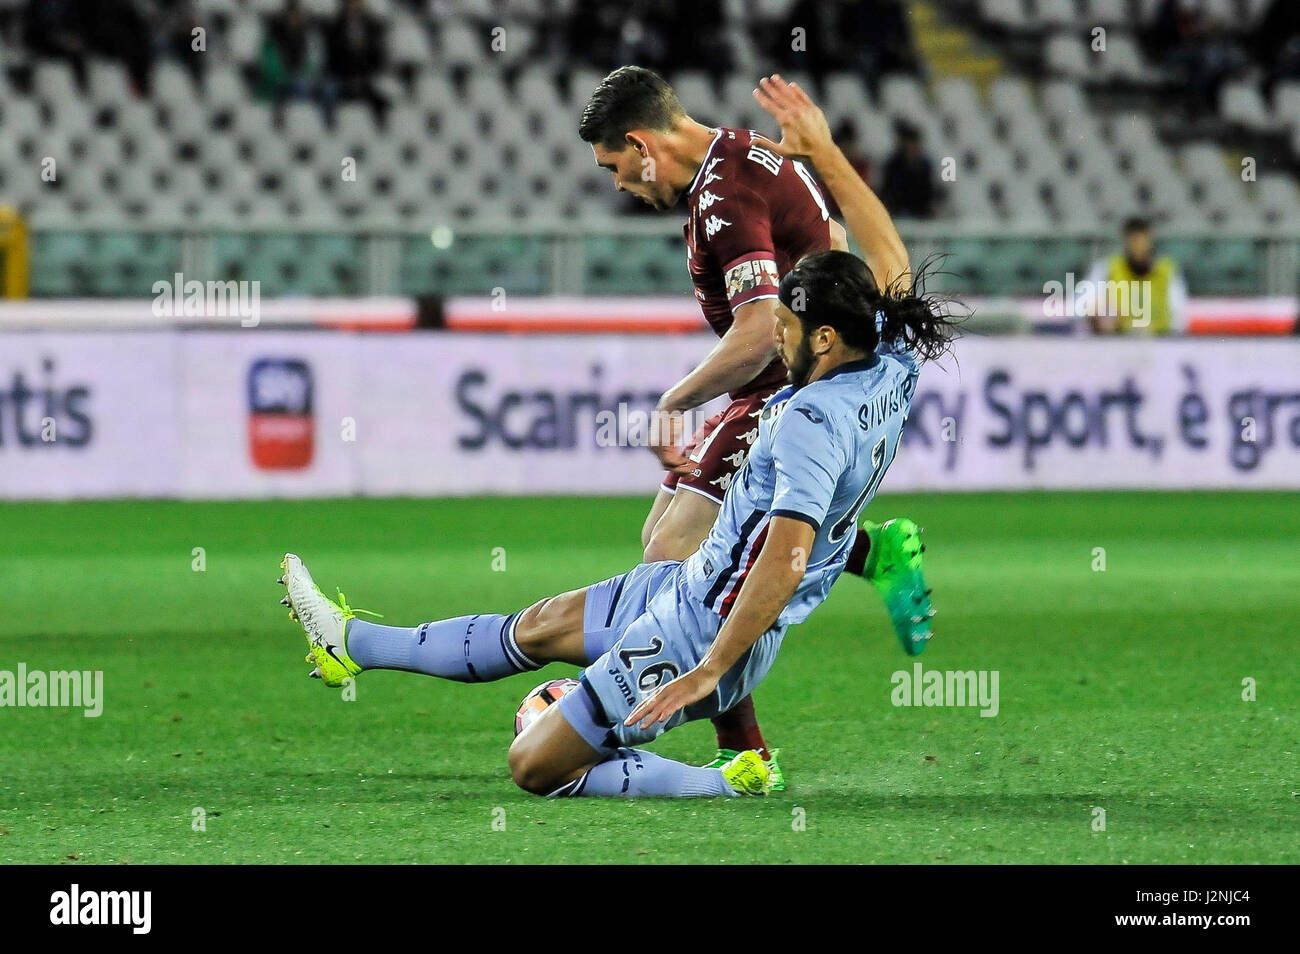 Turin, Italy. 29th April, 2017. Andrea Belotti (T) and Matias Silvestre (S) during the match Serie A TIM between Torino FC and Sampdoria. Stadio Olimpico Grande Torino on April 29, 2017 in Turin, Italy - Credit: FABIO PETROSINO/Alamy Live News Stock Photo